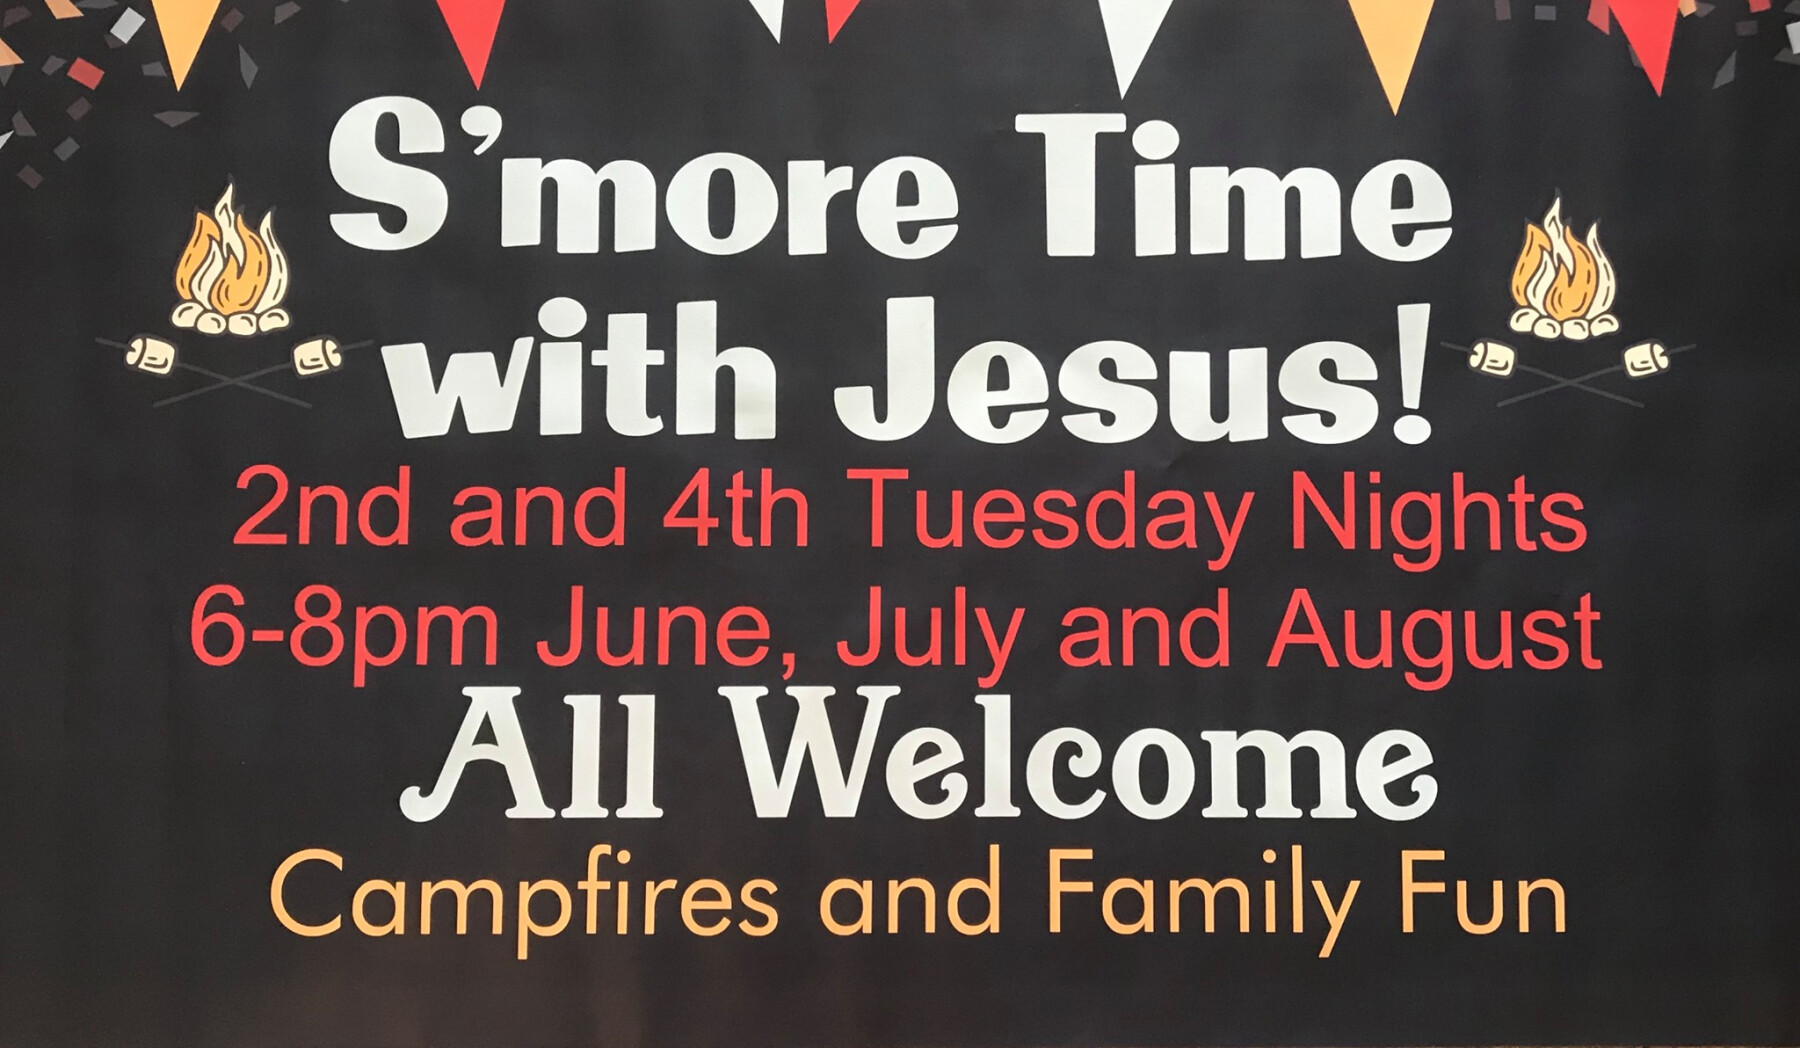 S'more Time with Jesus